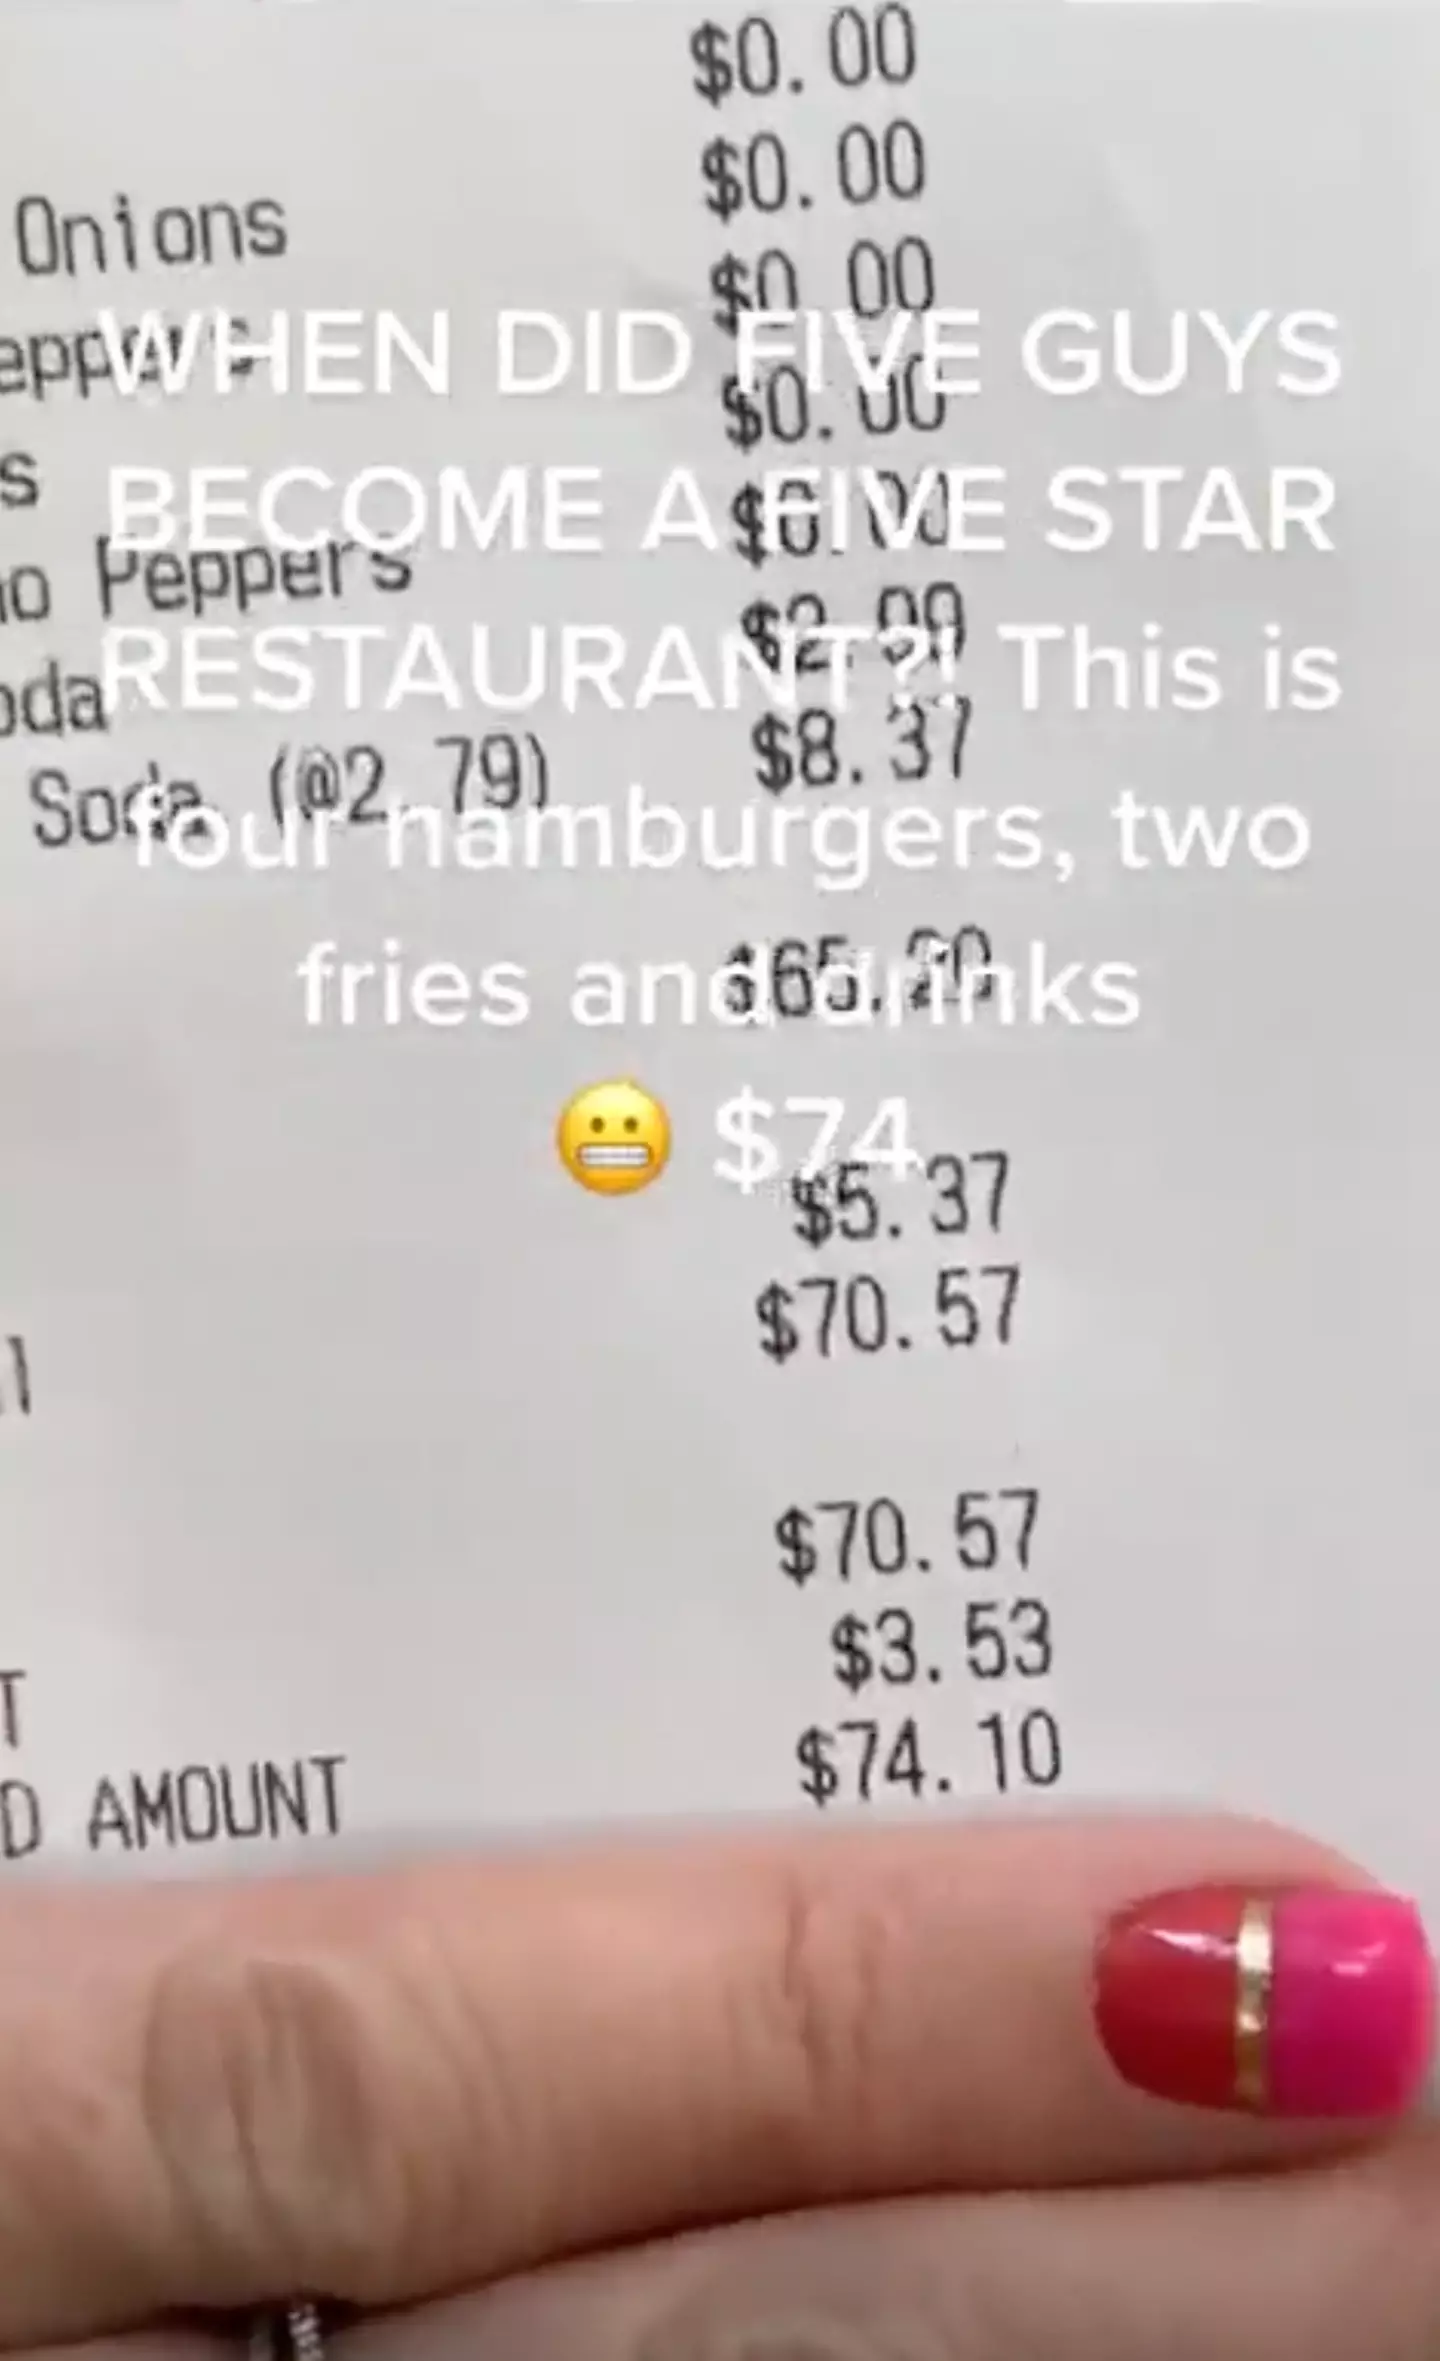 The TikToker revealed they spent a staggering $74 on a Five Guys meal.